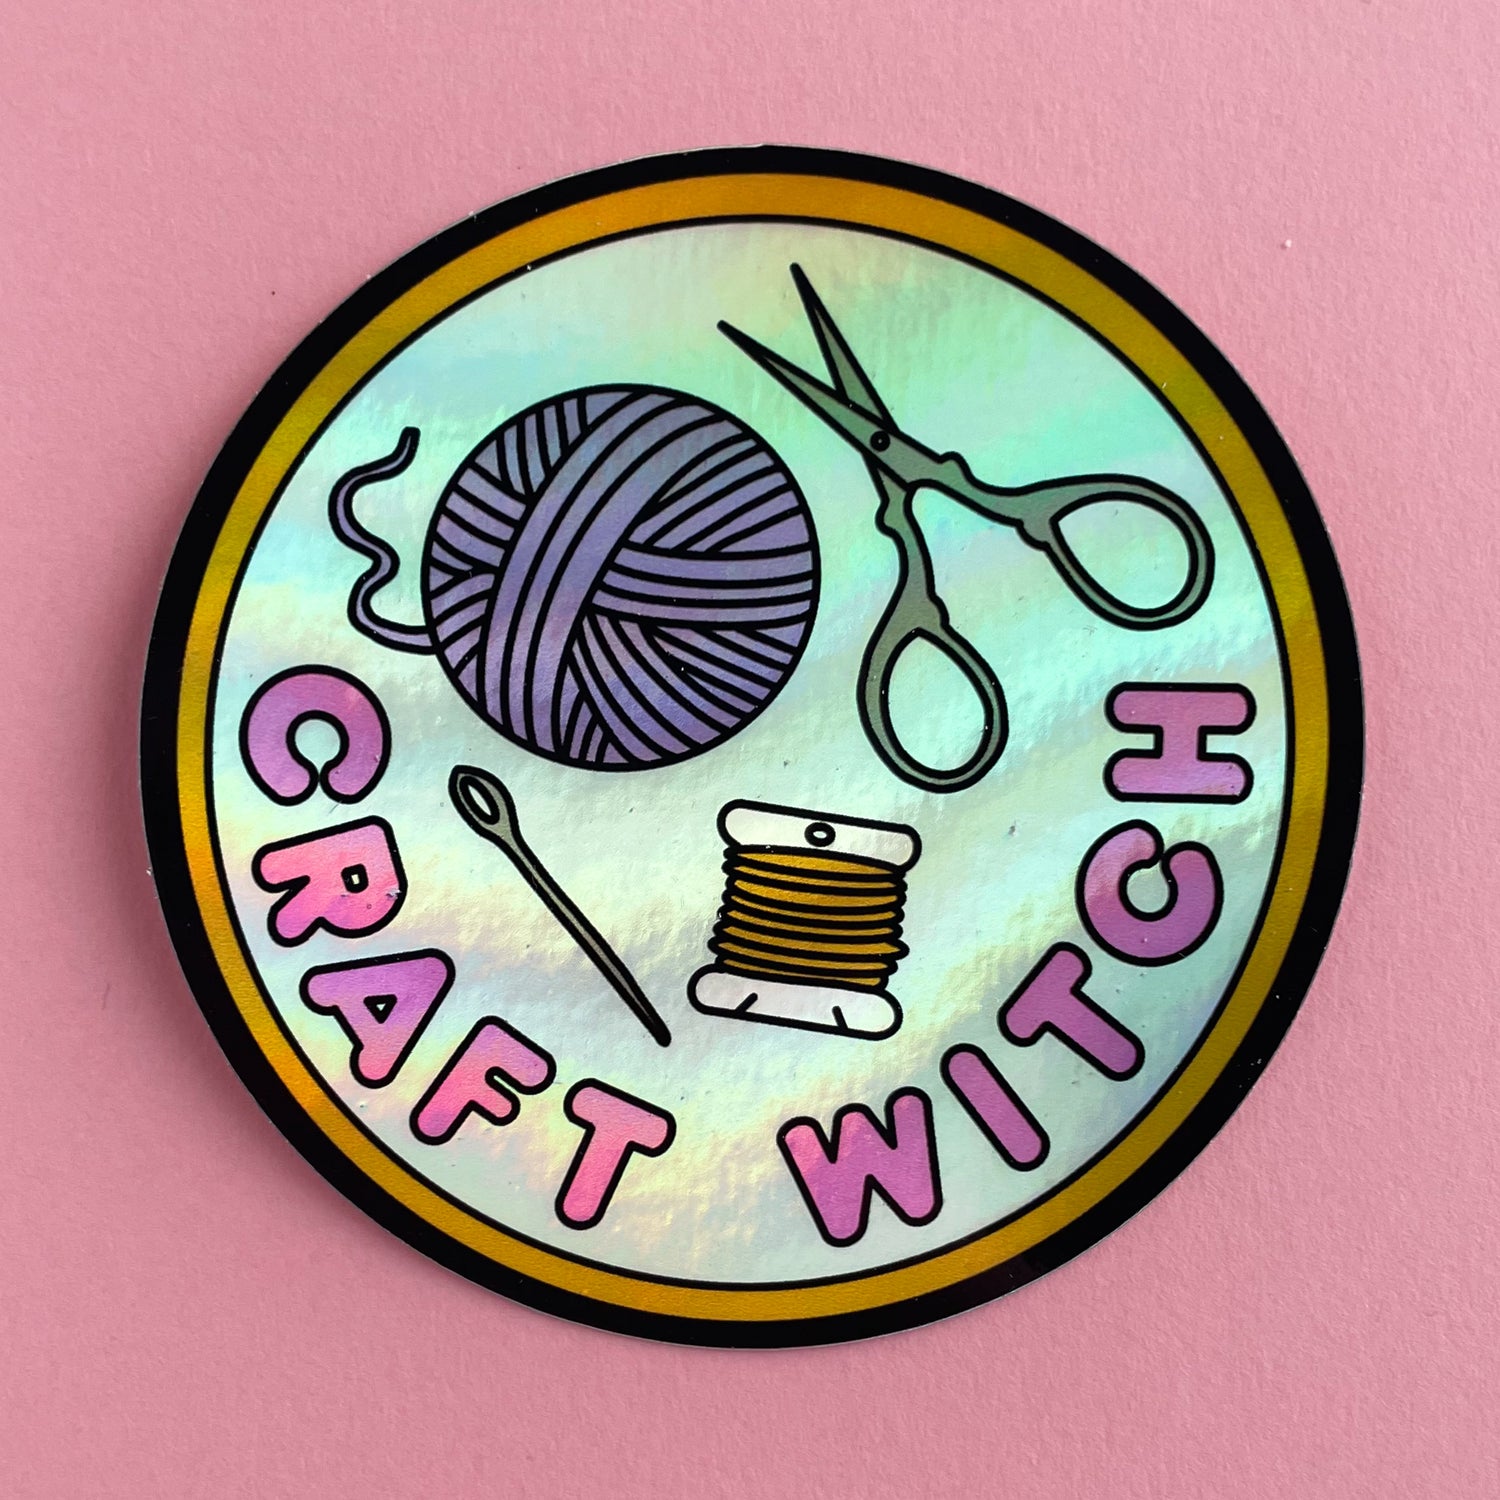 A circular holographic sticker. It has a yellow borer with a light blue background and hot pink text that reads "Craft Witch". Above the words a needle, thread, yarn ball, and scissors are depicted.